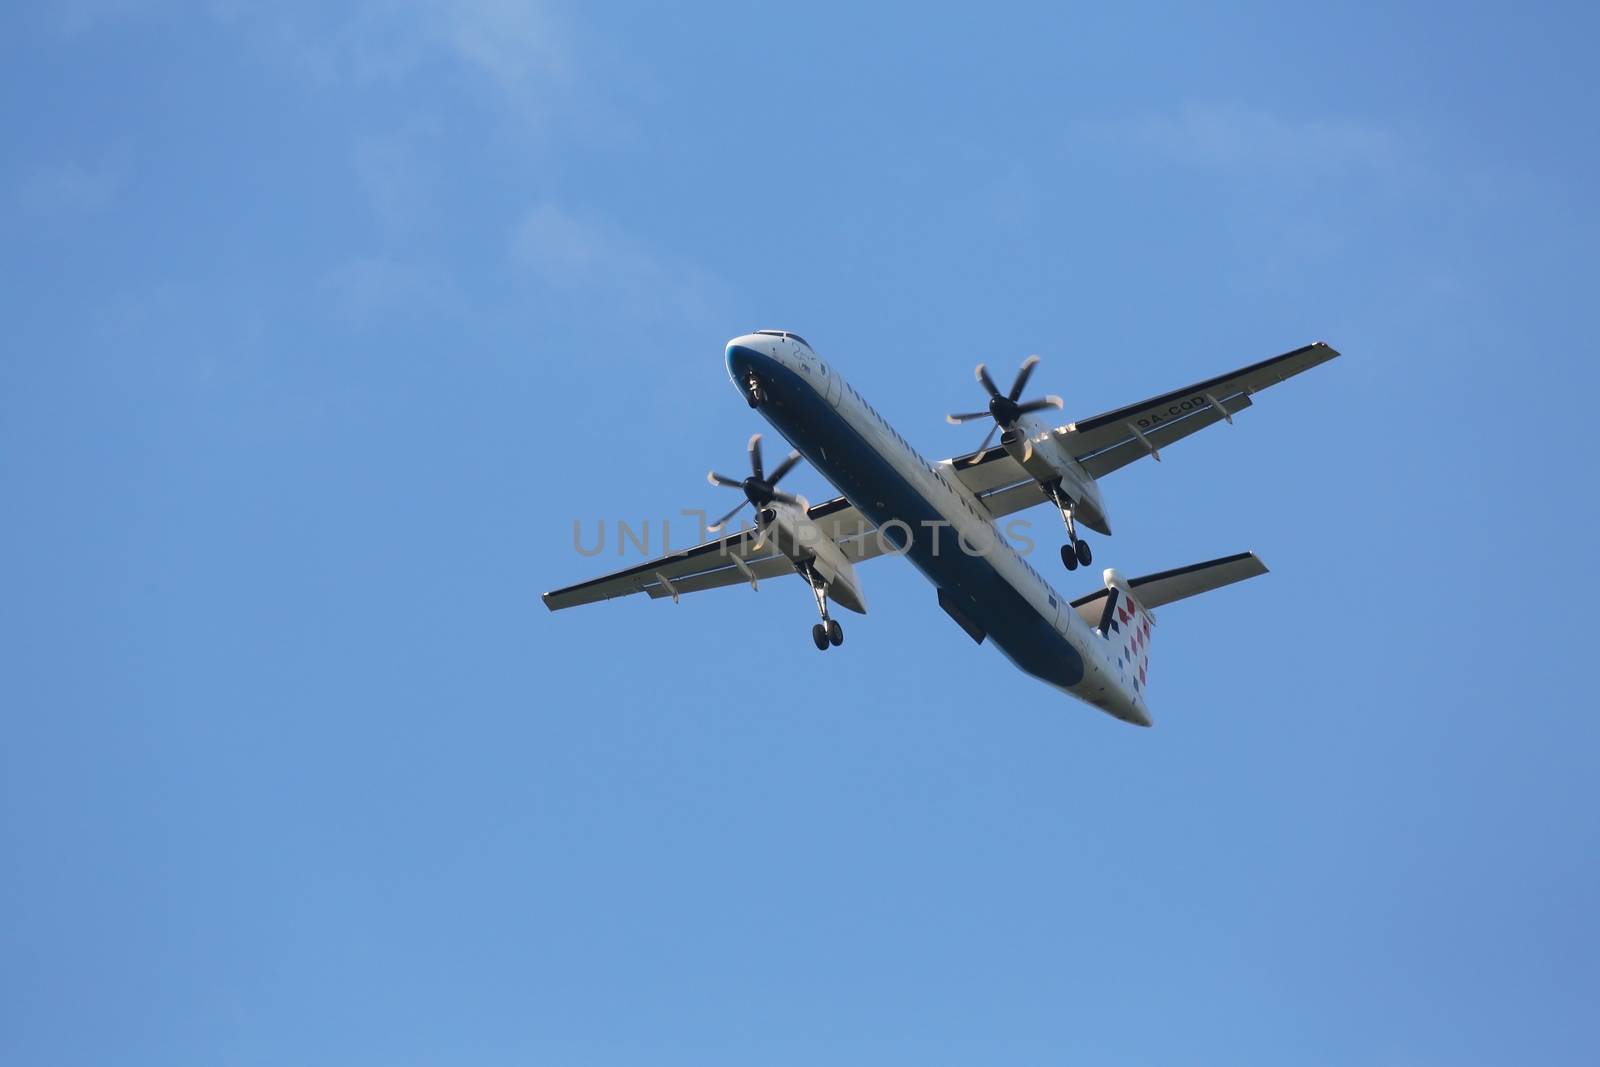 Bombardier DH8D, registration 9A-CQD of Croatia Airlines landing on Zagreb Airport Pleso